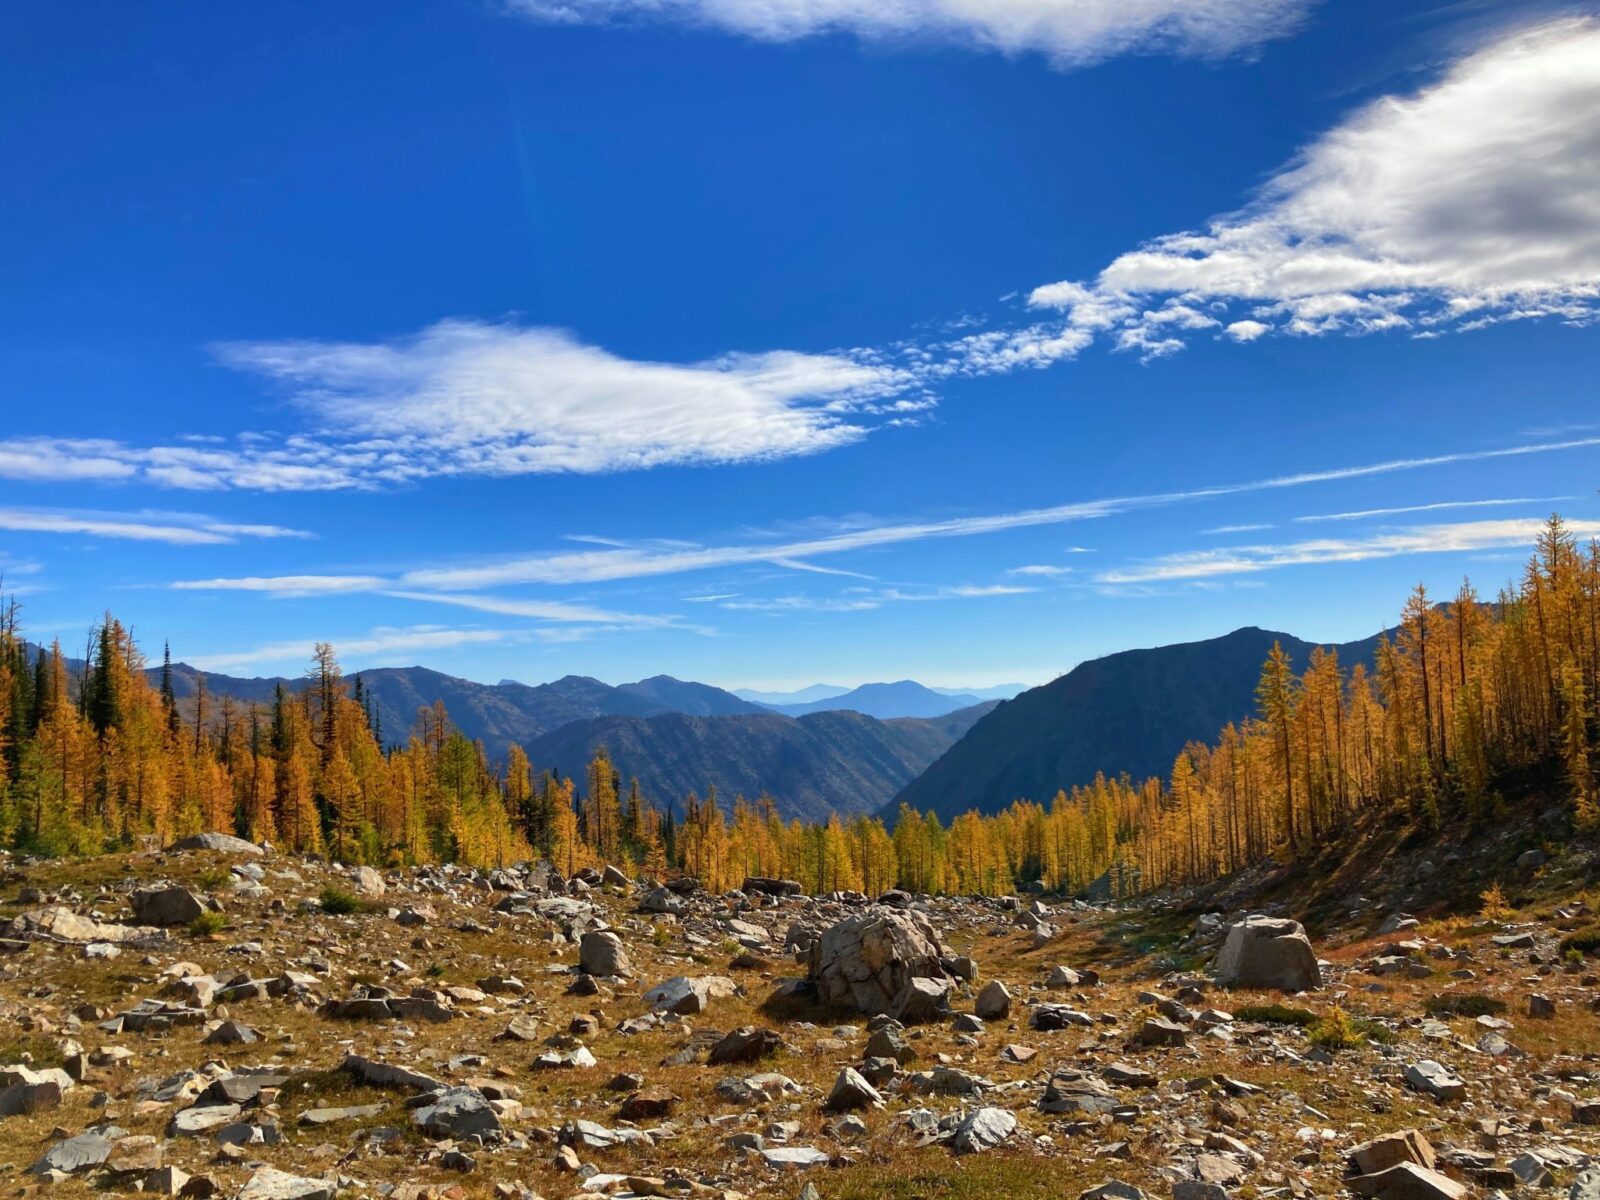 Golden larch trees with distant mountains and blue skies with some clouds in the background along the Pacific Crest trail, one of the best larch hikes in washington